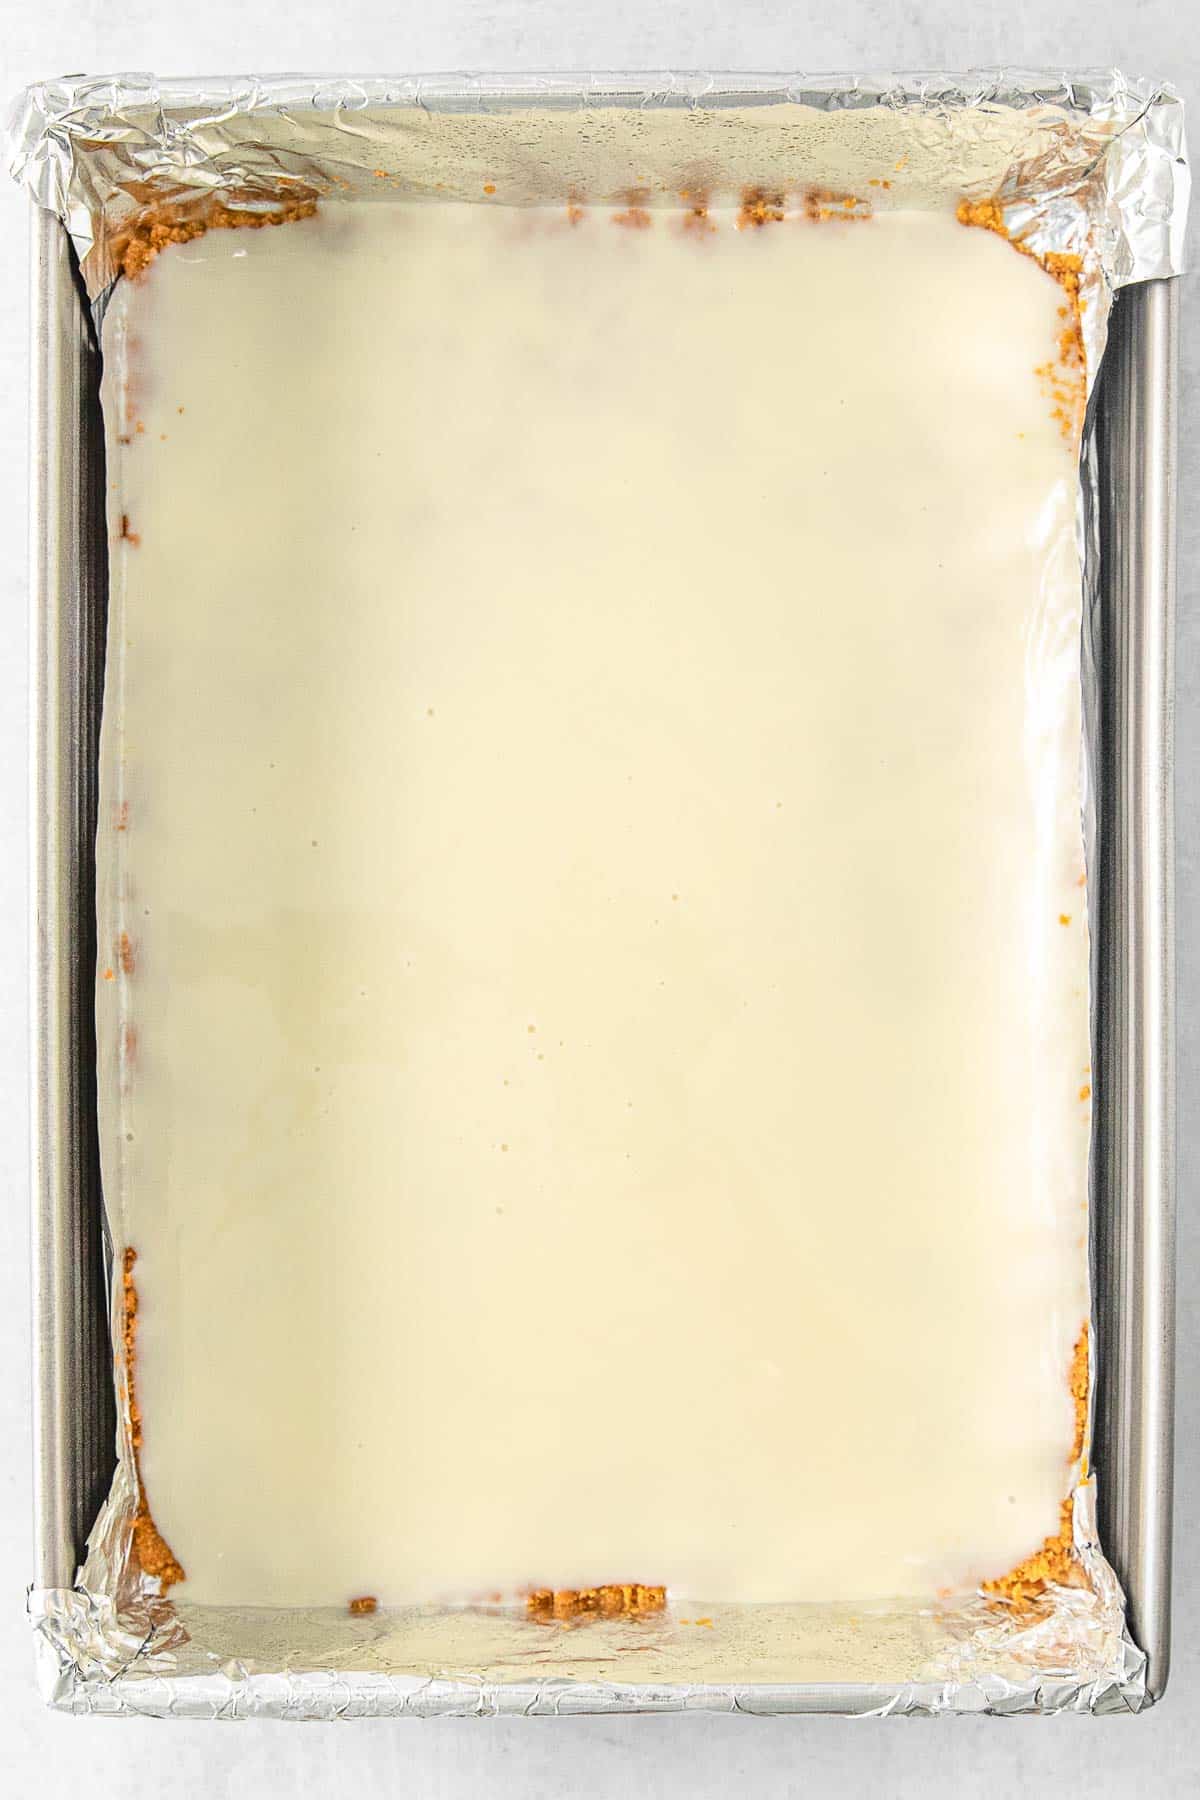 Sweetened condensed milk evenly poured over the graham cracker crust in baking sheet.